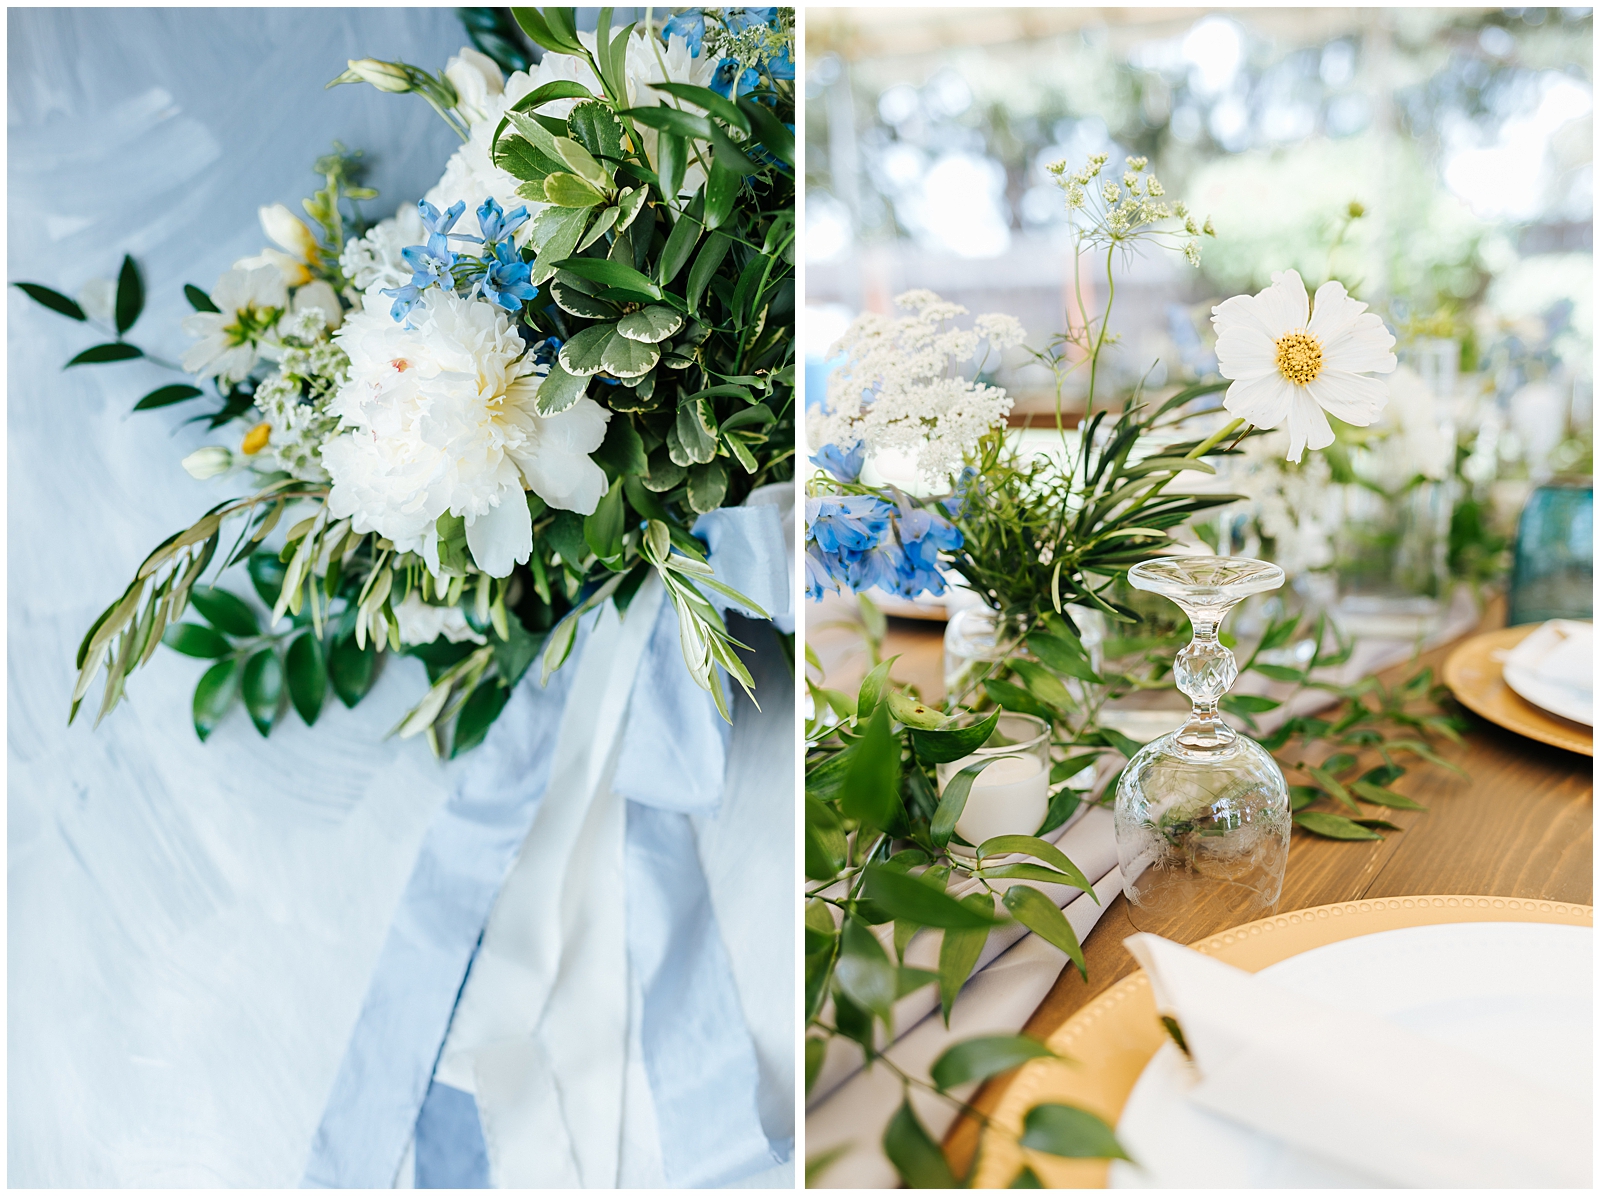 Floral Styling by Petal Works Design